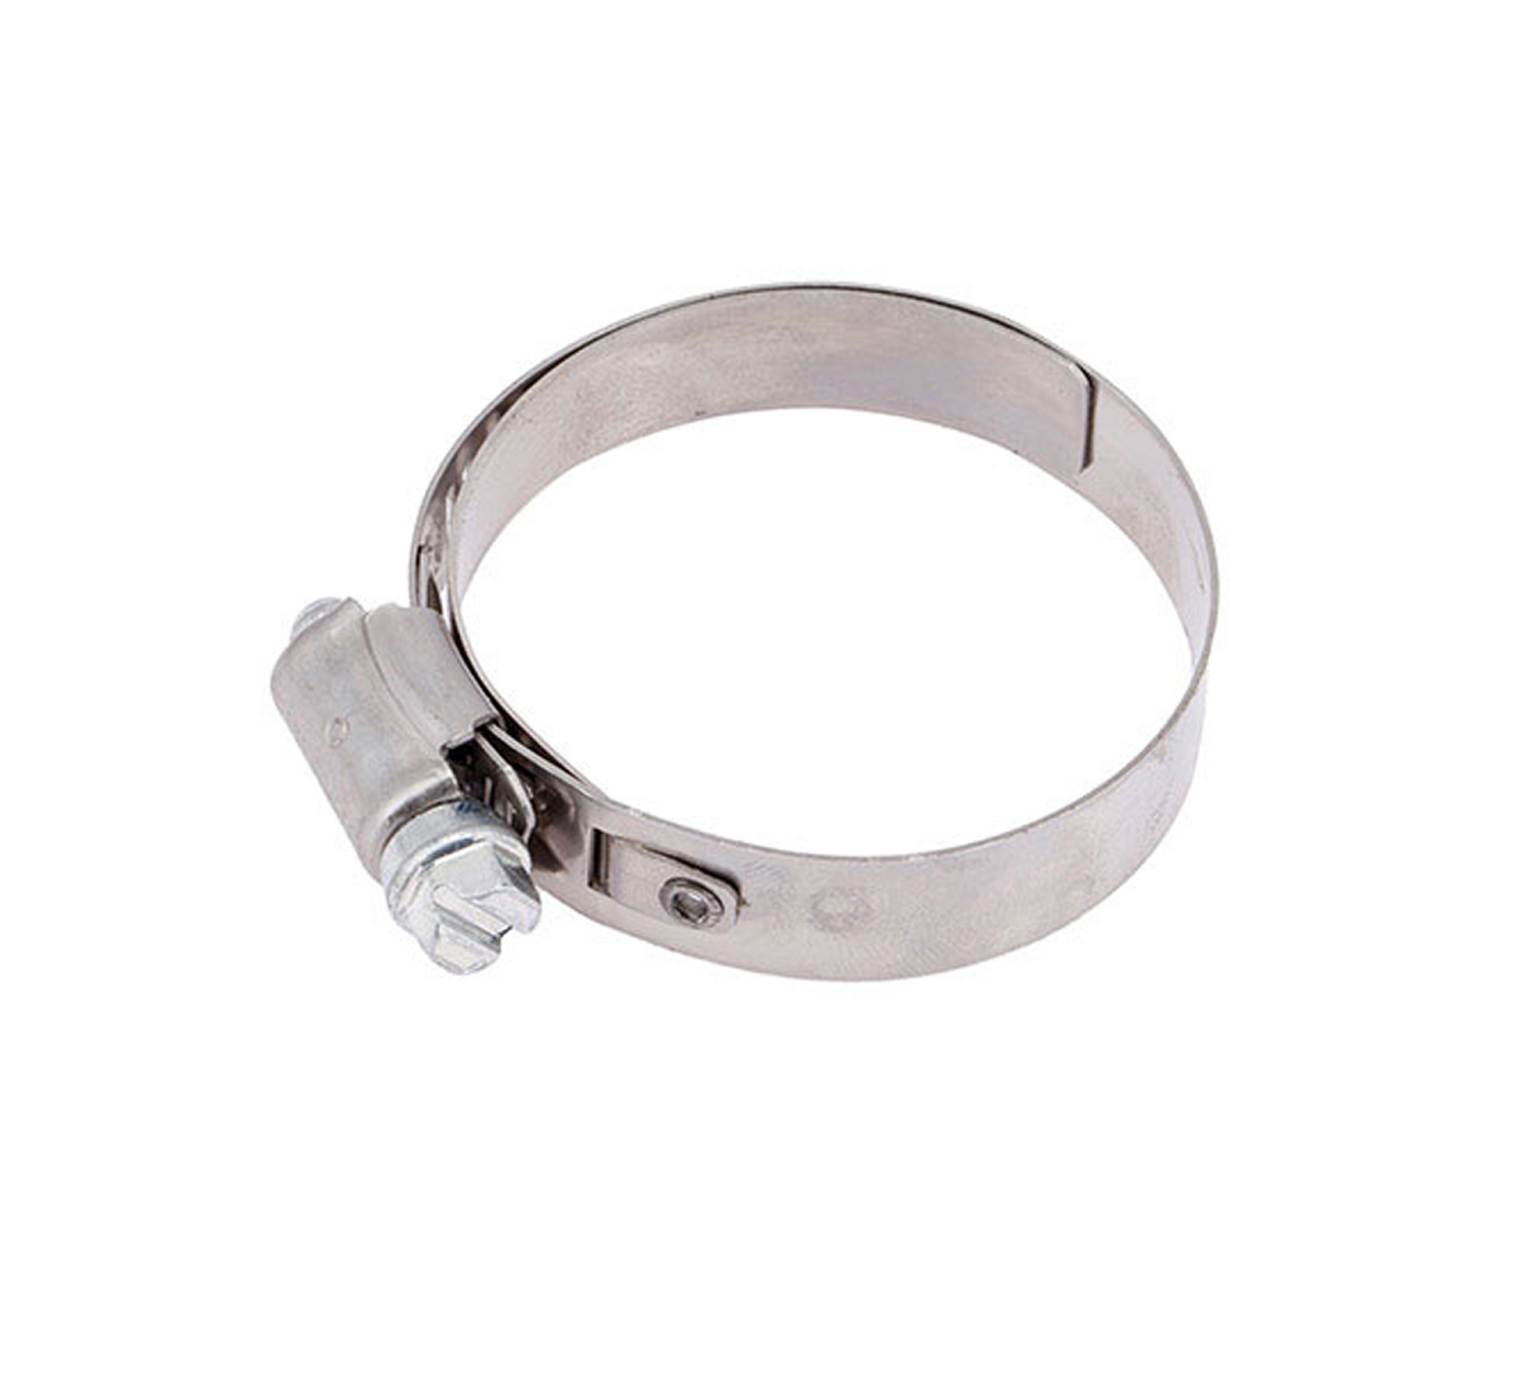 79381 Stainless Steel Hose Clamp - 1.25 in - 2 x 0.5 in alt 1